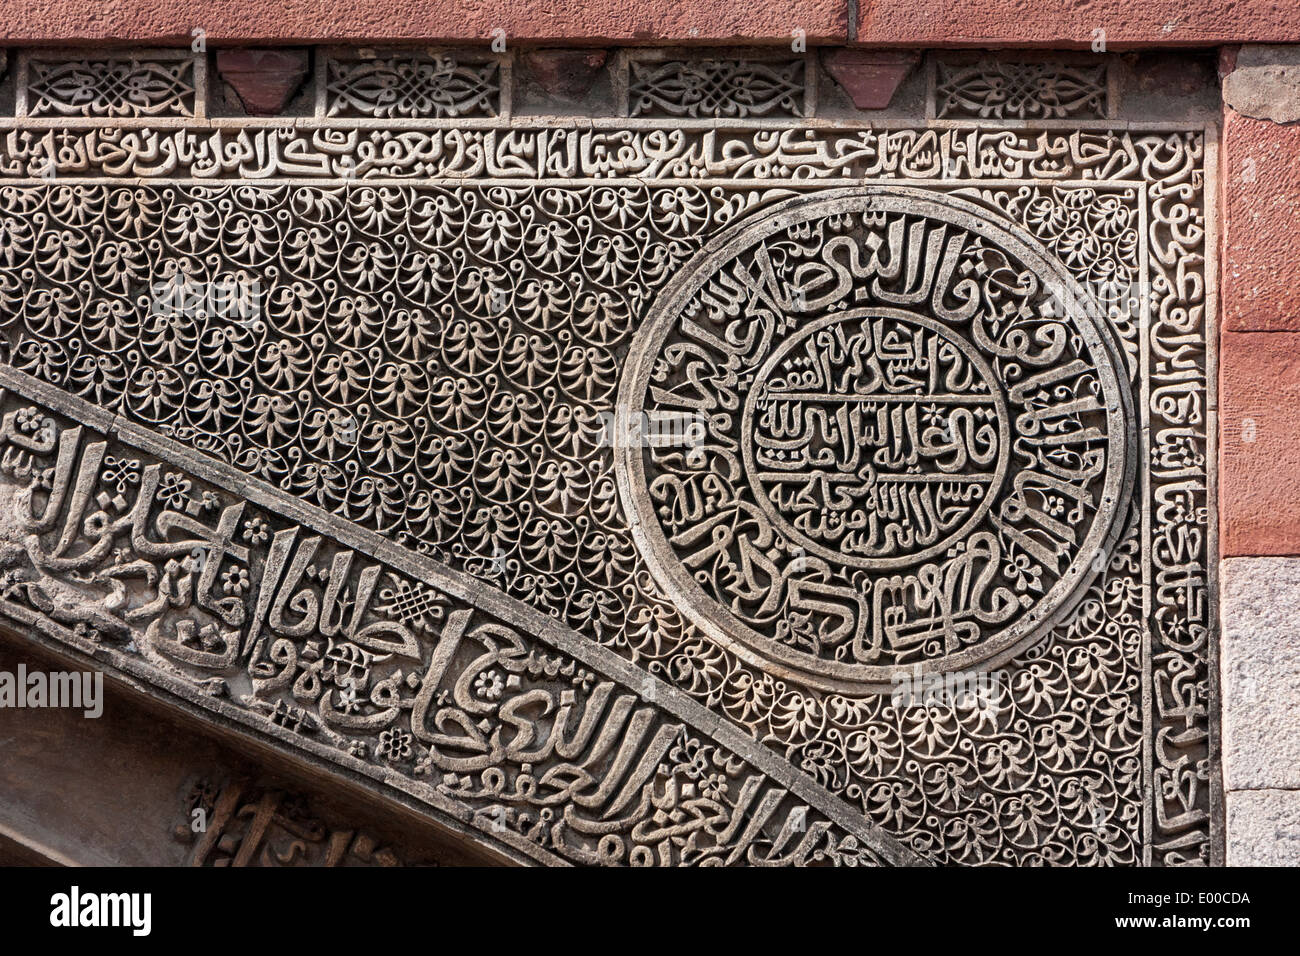 New Delhi, India. Lodi Gardens. Floral and Calligraphy Decorations above the Entrance to the Bara Gumbad Mosque. Stock Photo